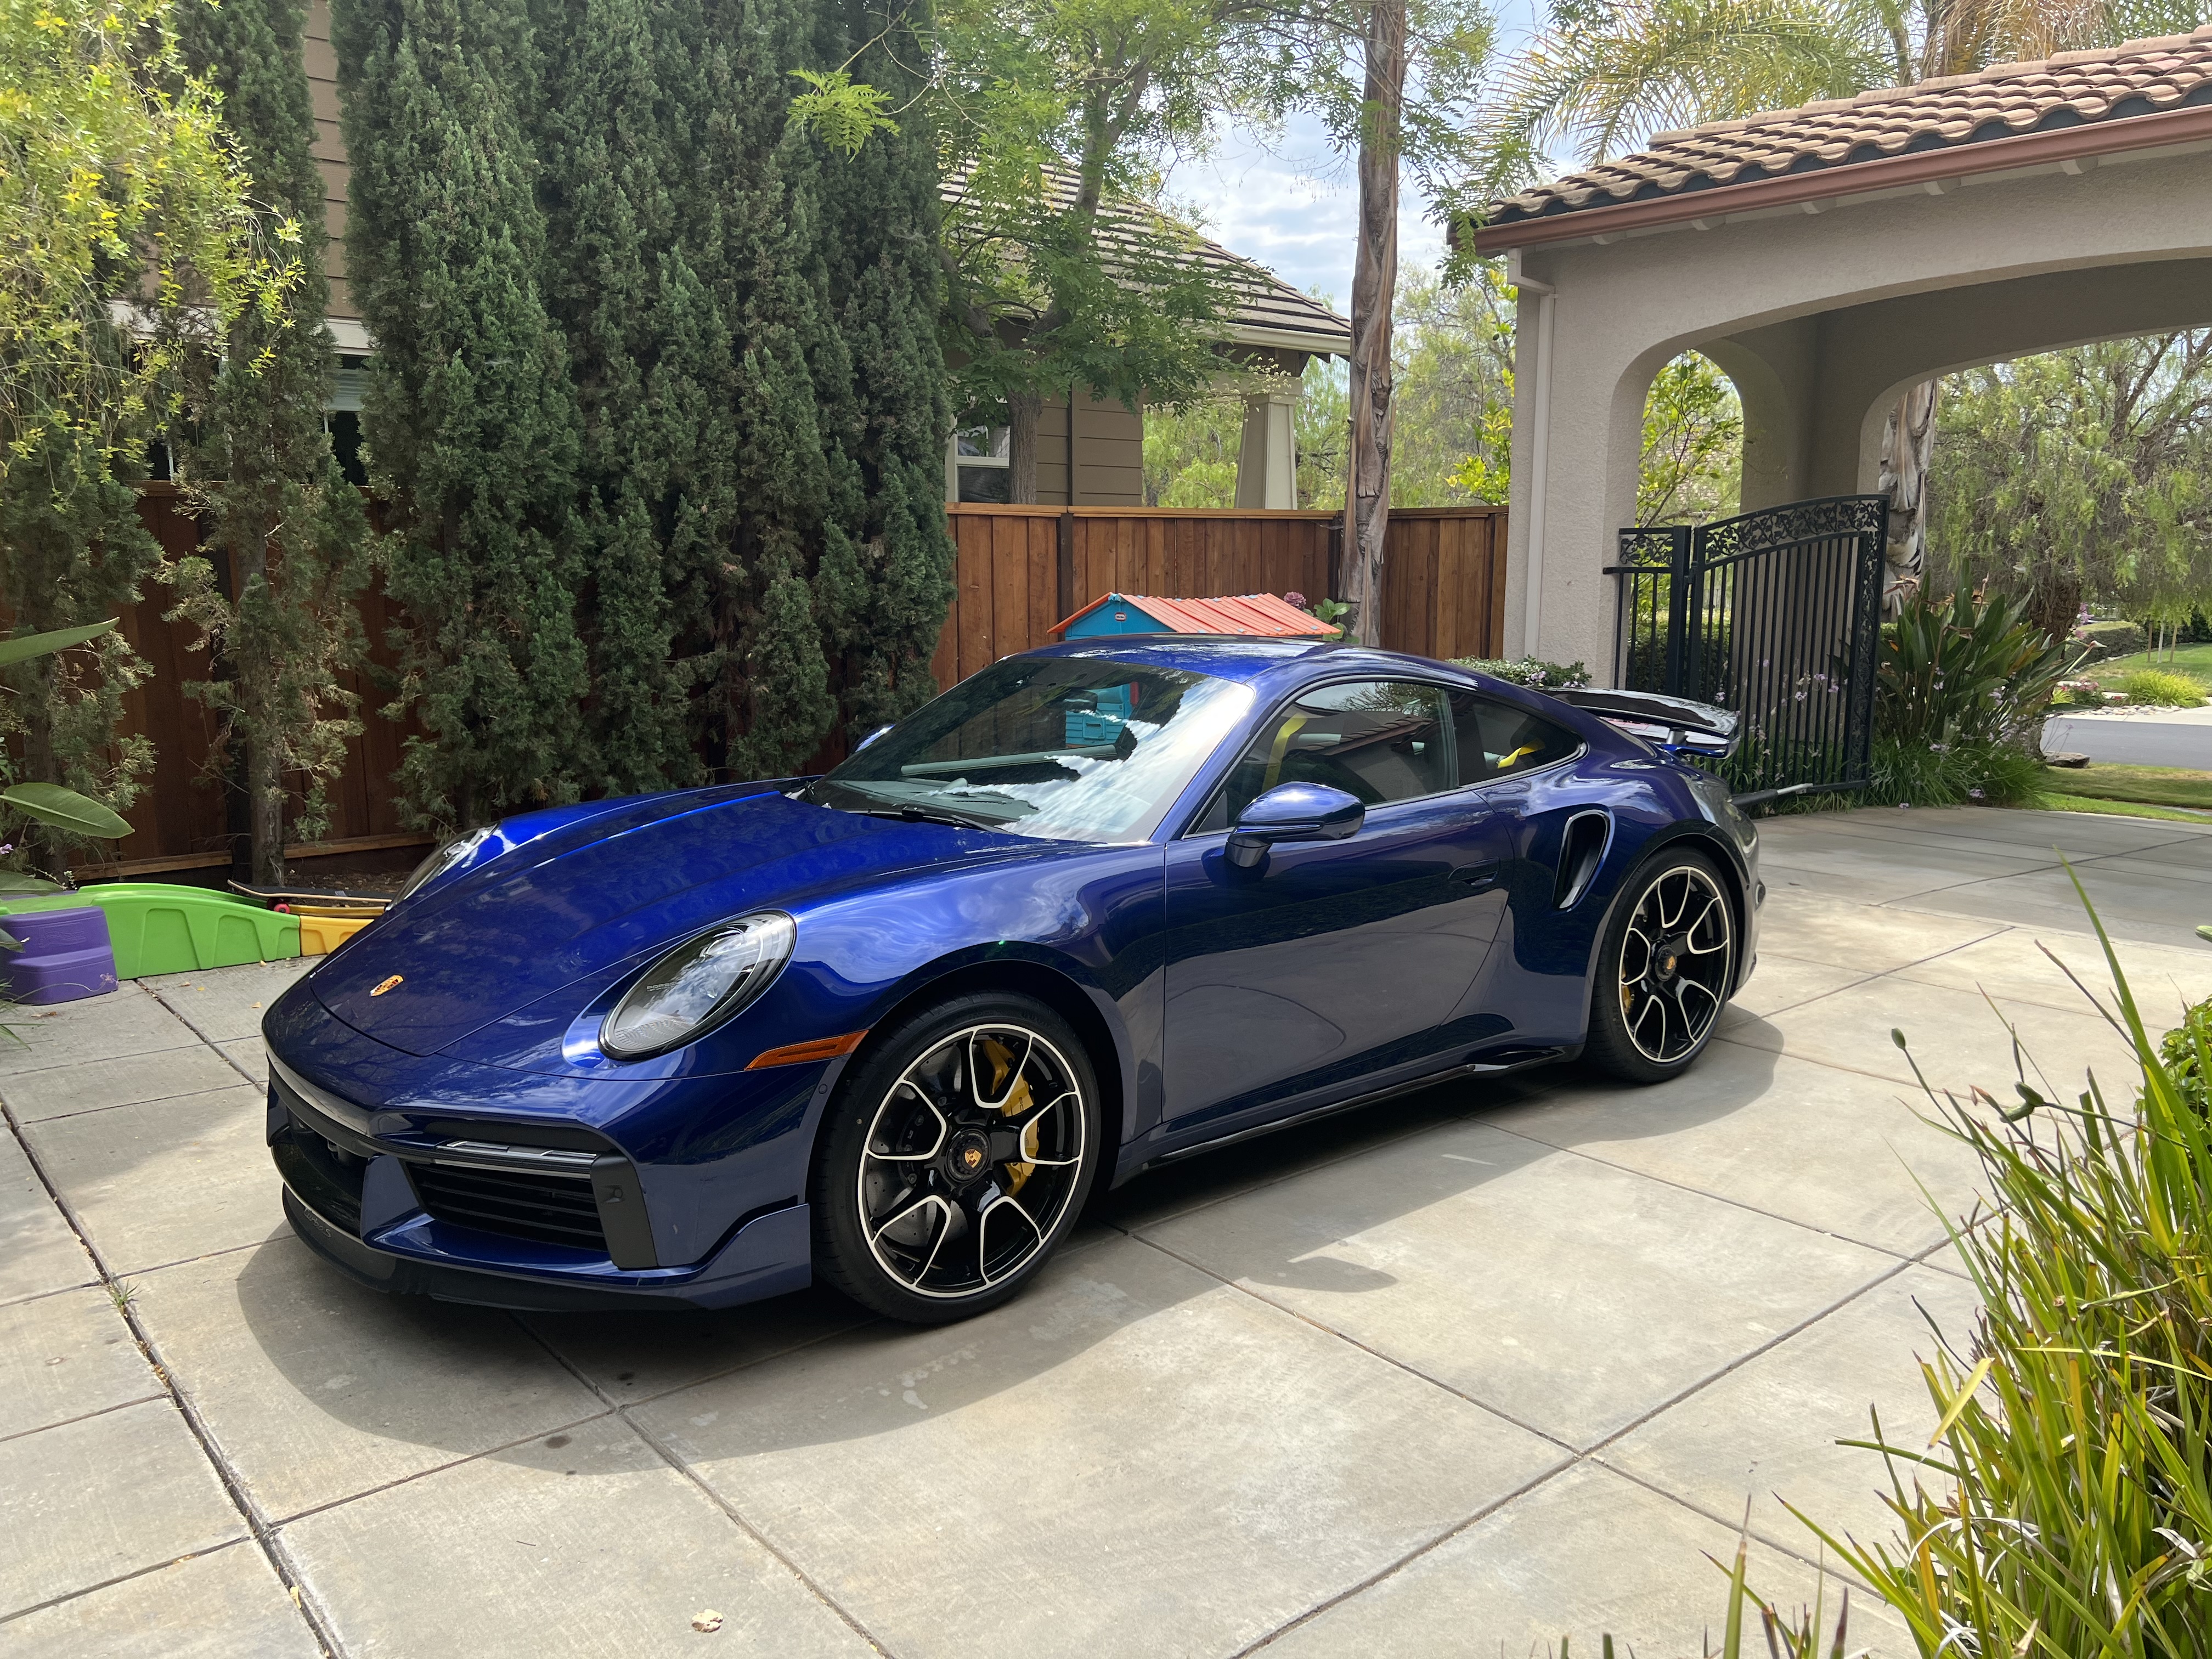 https://rennlist.com/forums/attachments/992-turbo-and-turbo-s/1330546d1660357916-high-gloss-black-sport-design-package-vs-exterior-painted-74fc3c75-b1a9-4248-ba22-9cdf54504b85.jpeg